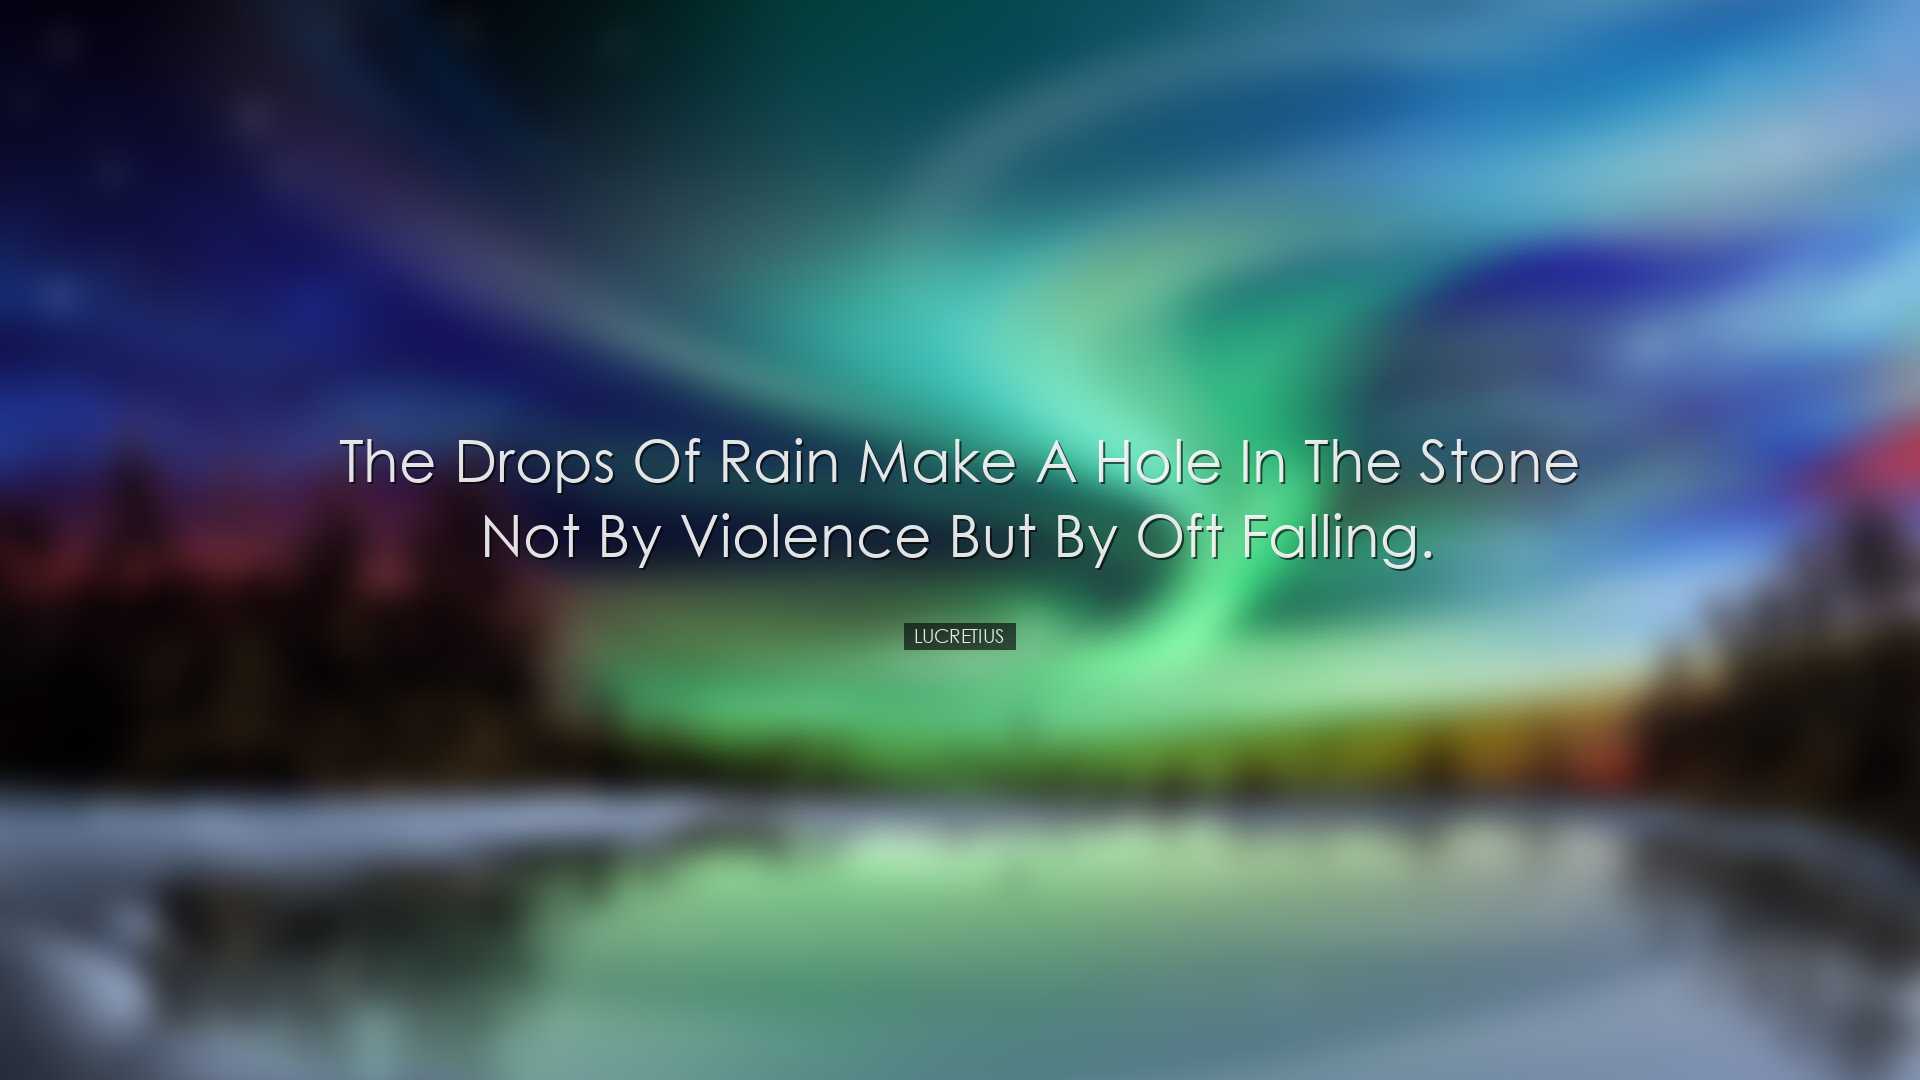 The drops of rain make a hole in the stone not by violence but by